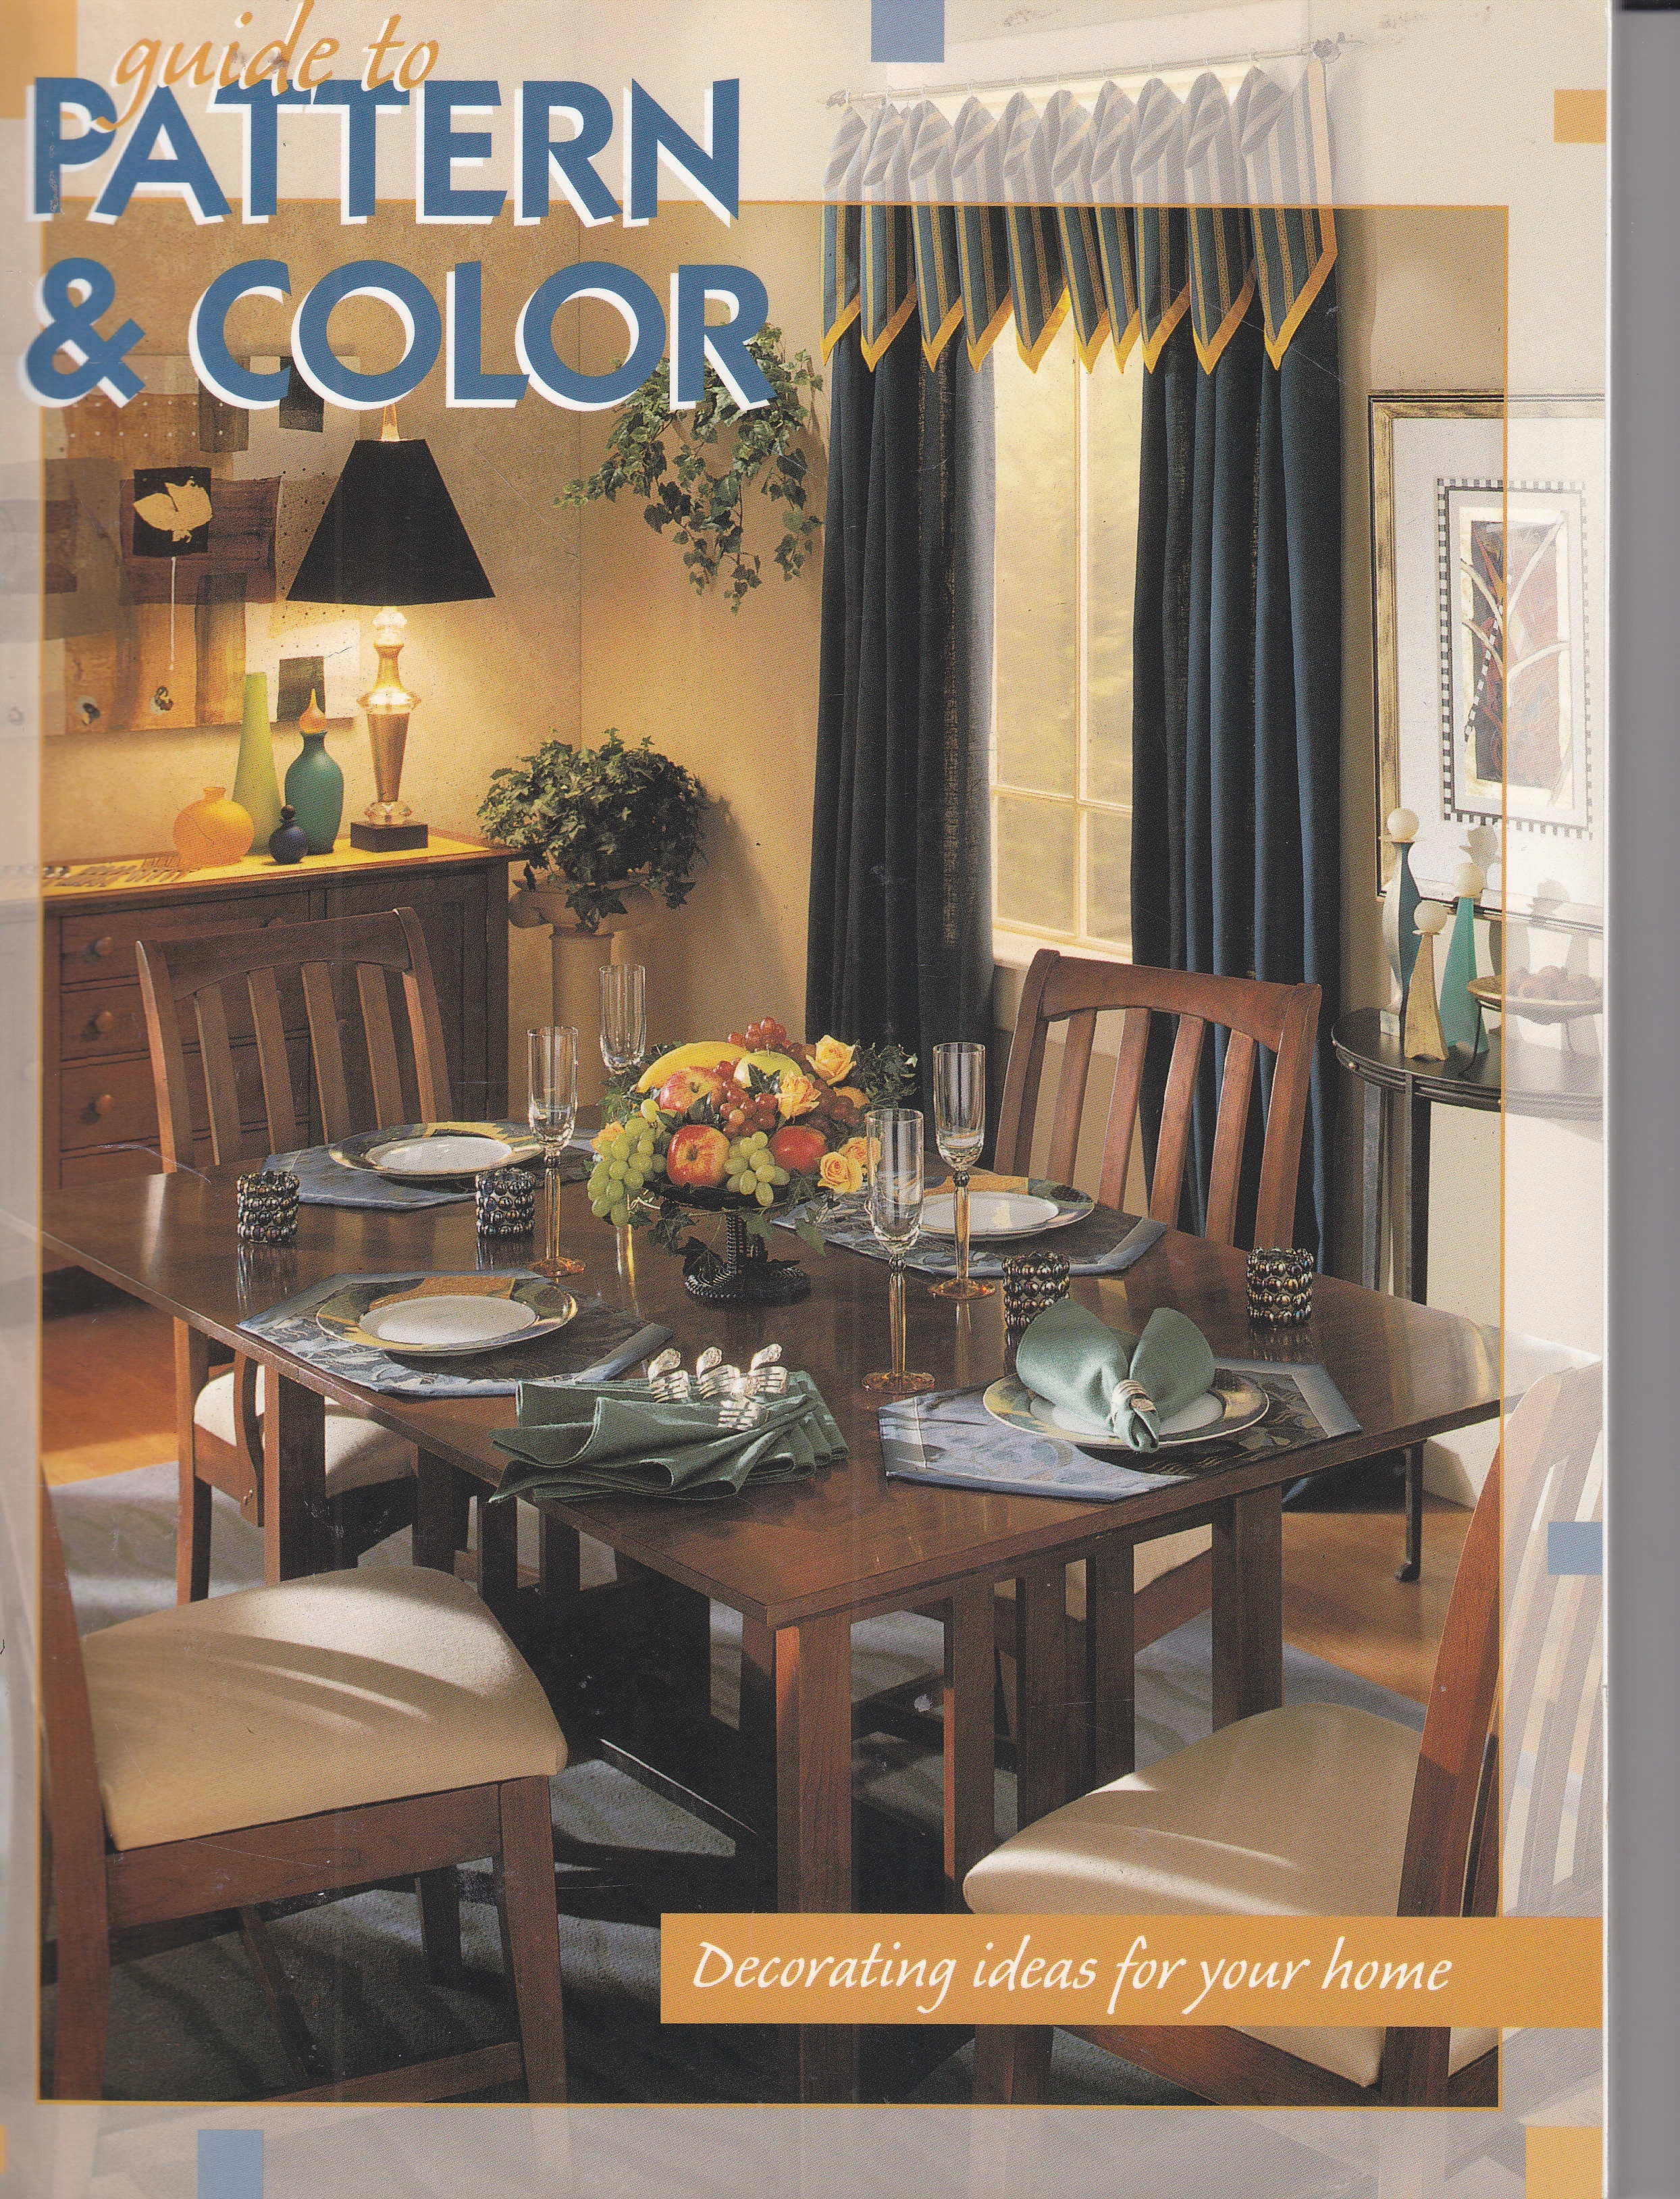 Image for Guide to Pattern & Color Decorating Ideas for Your Home